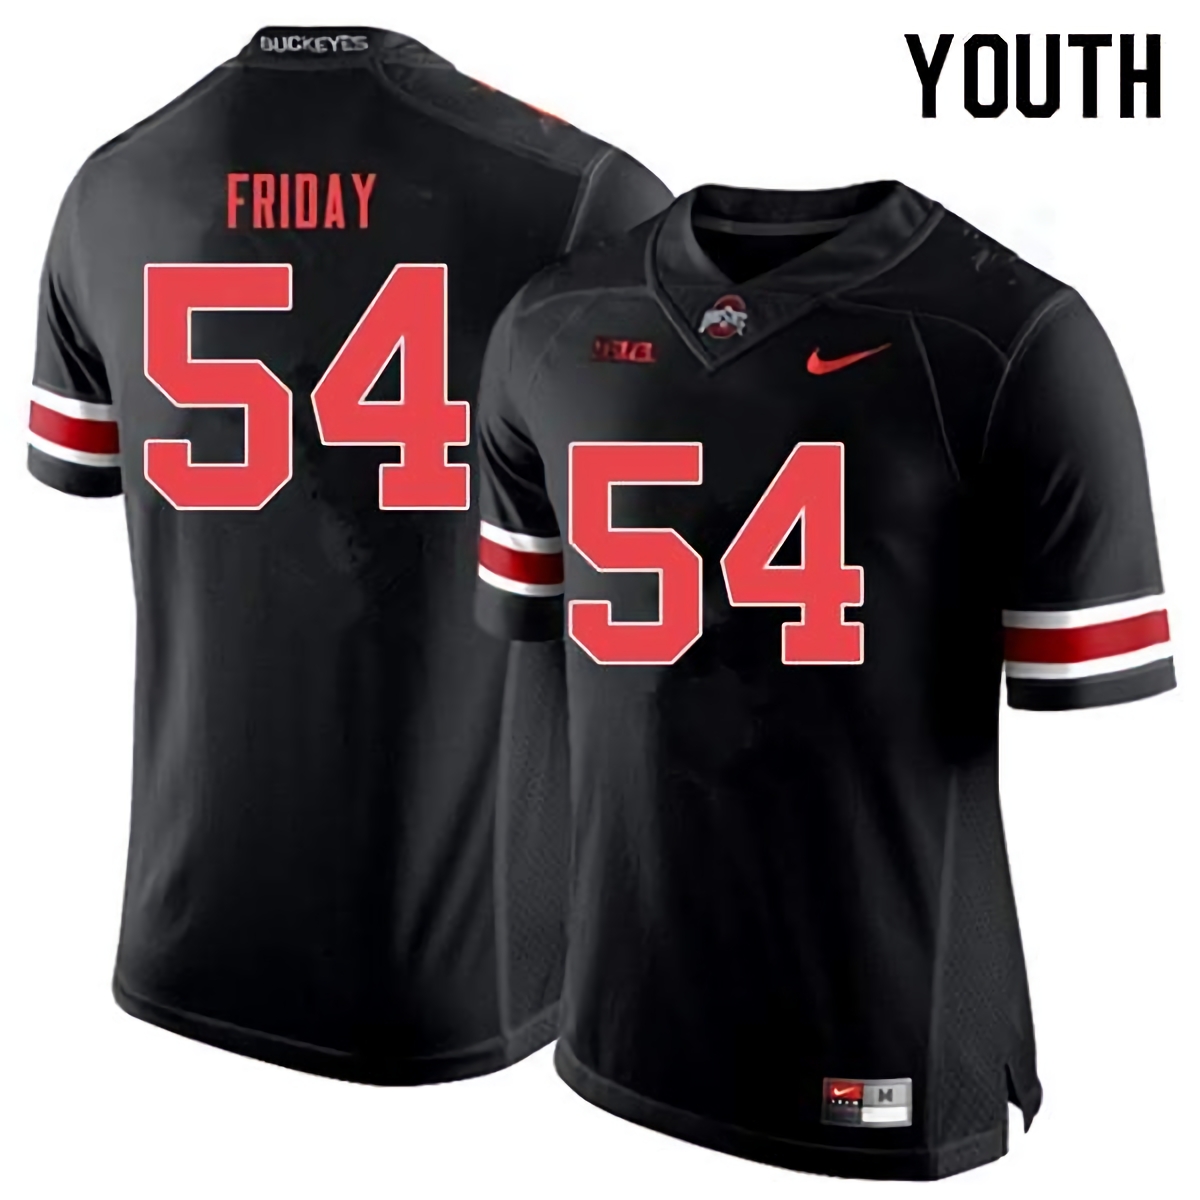 Tyler Friday Ohio State Buckeyes Youth NCAA #54 Nike Black Out College Stitched Football Jersey DPI2356MK